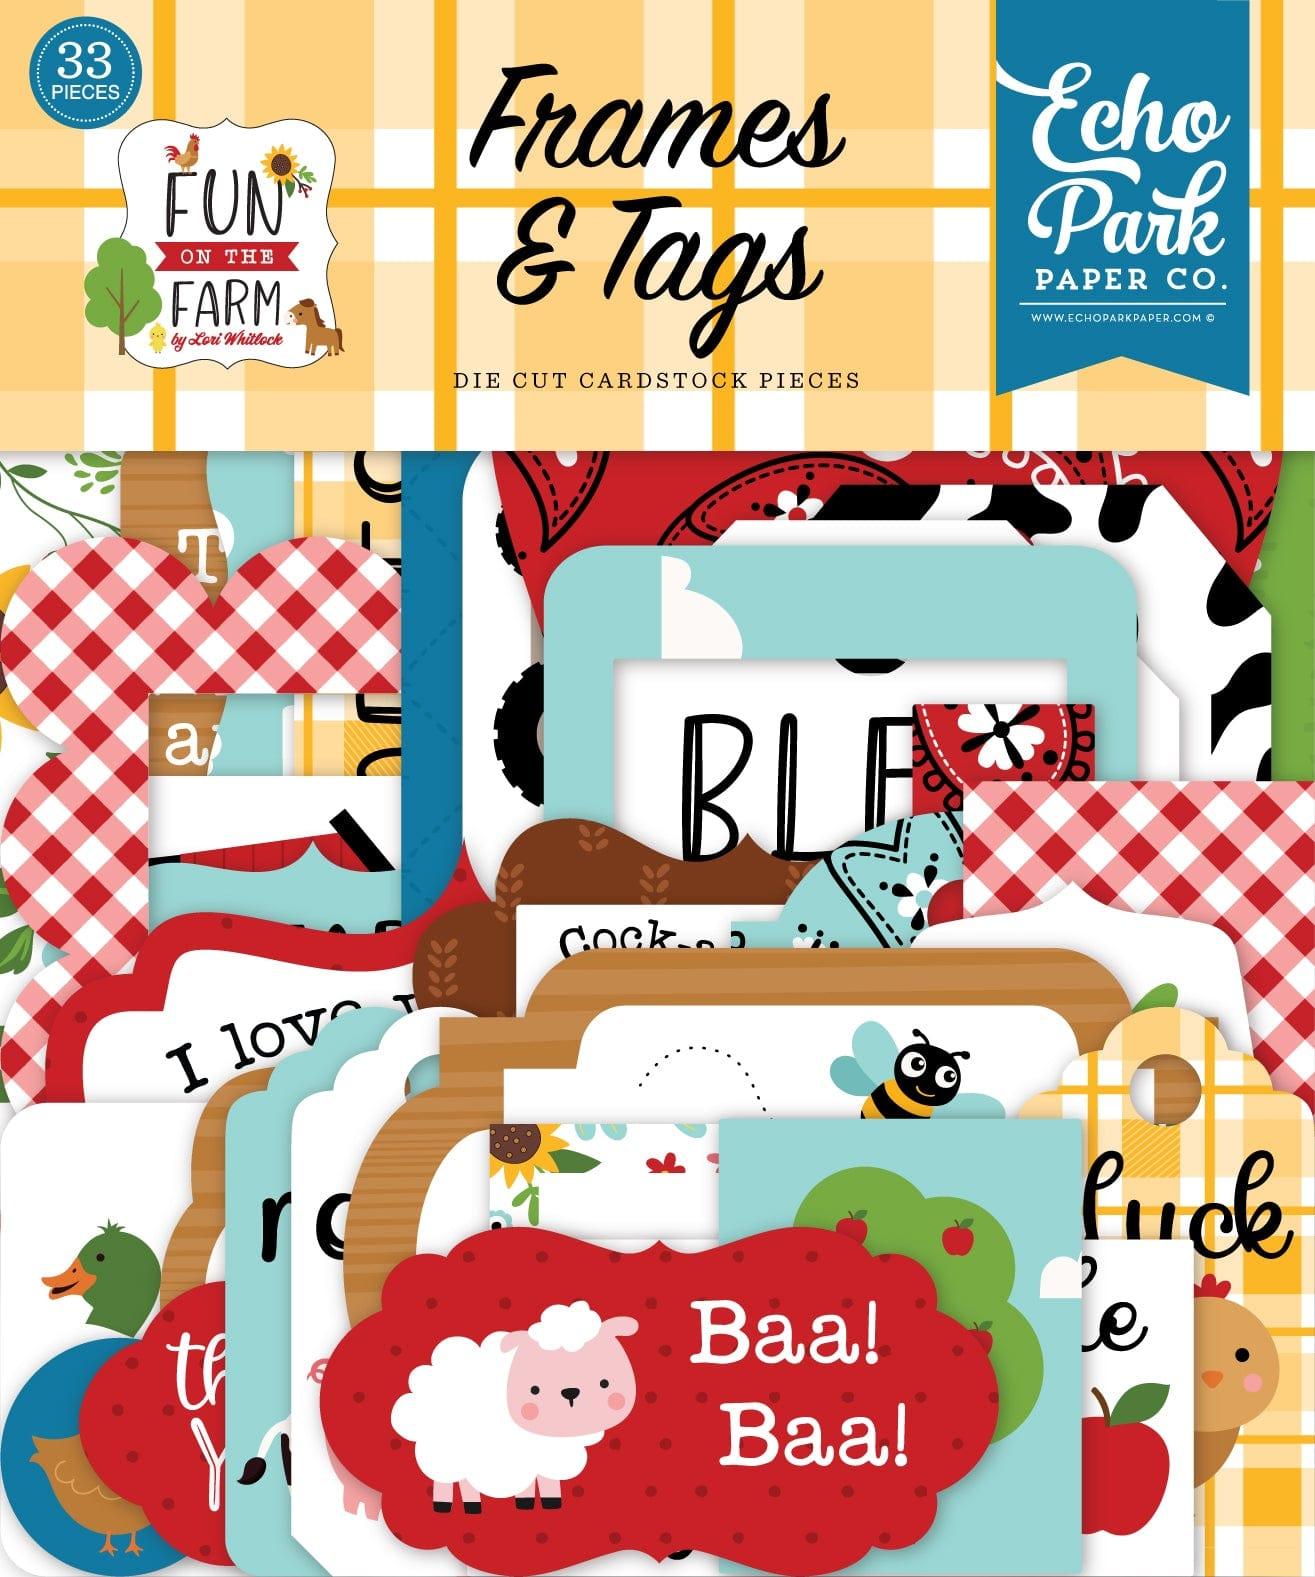 Fun On The Farm Collection 5 x 5 Scrapbook Tags & Frames Die Cuts by Echo Park Paper - Scrapbook Supply Companies